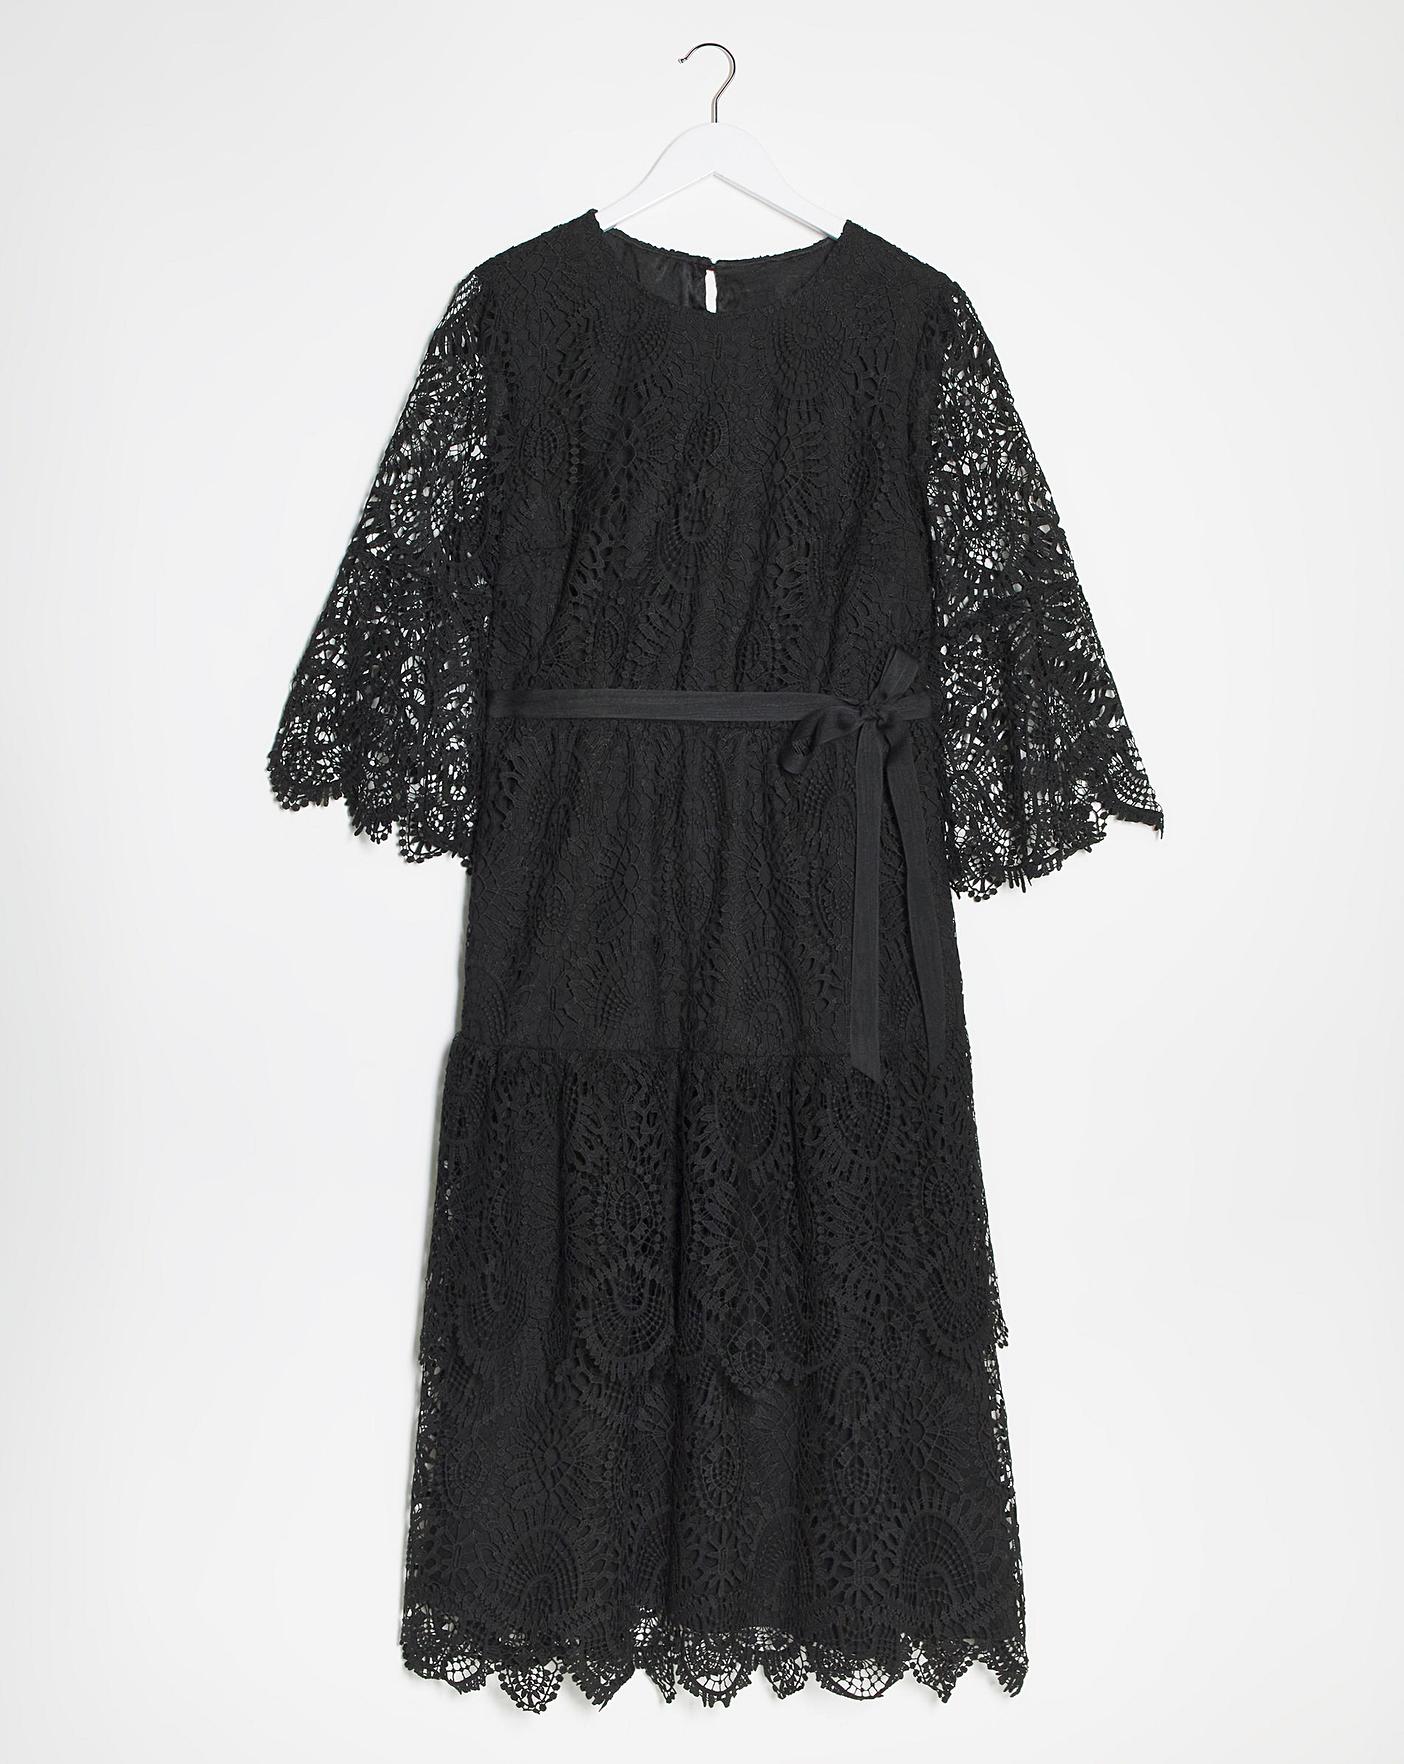 Joanna Hope Structured Lace Dress | J D Williams